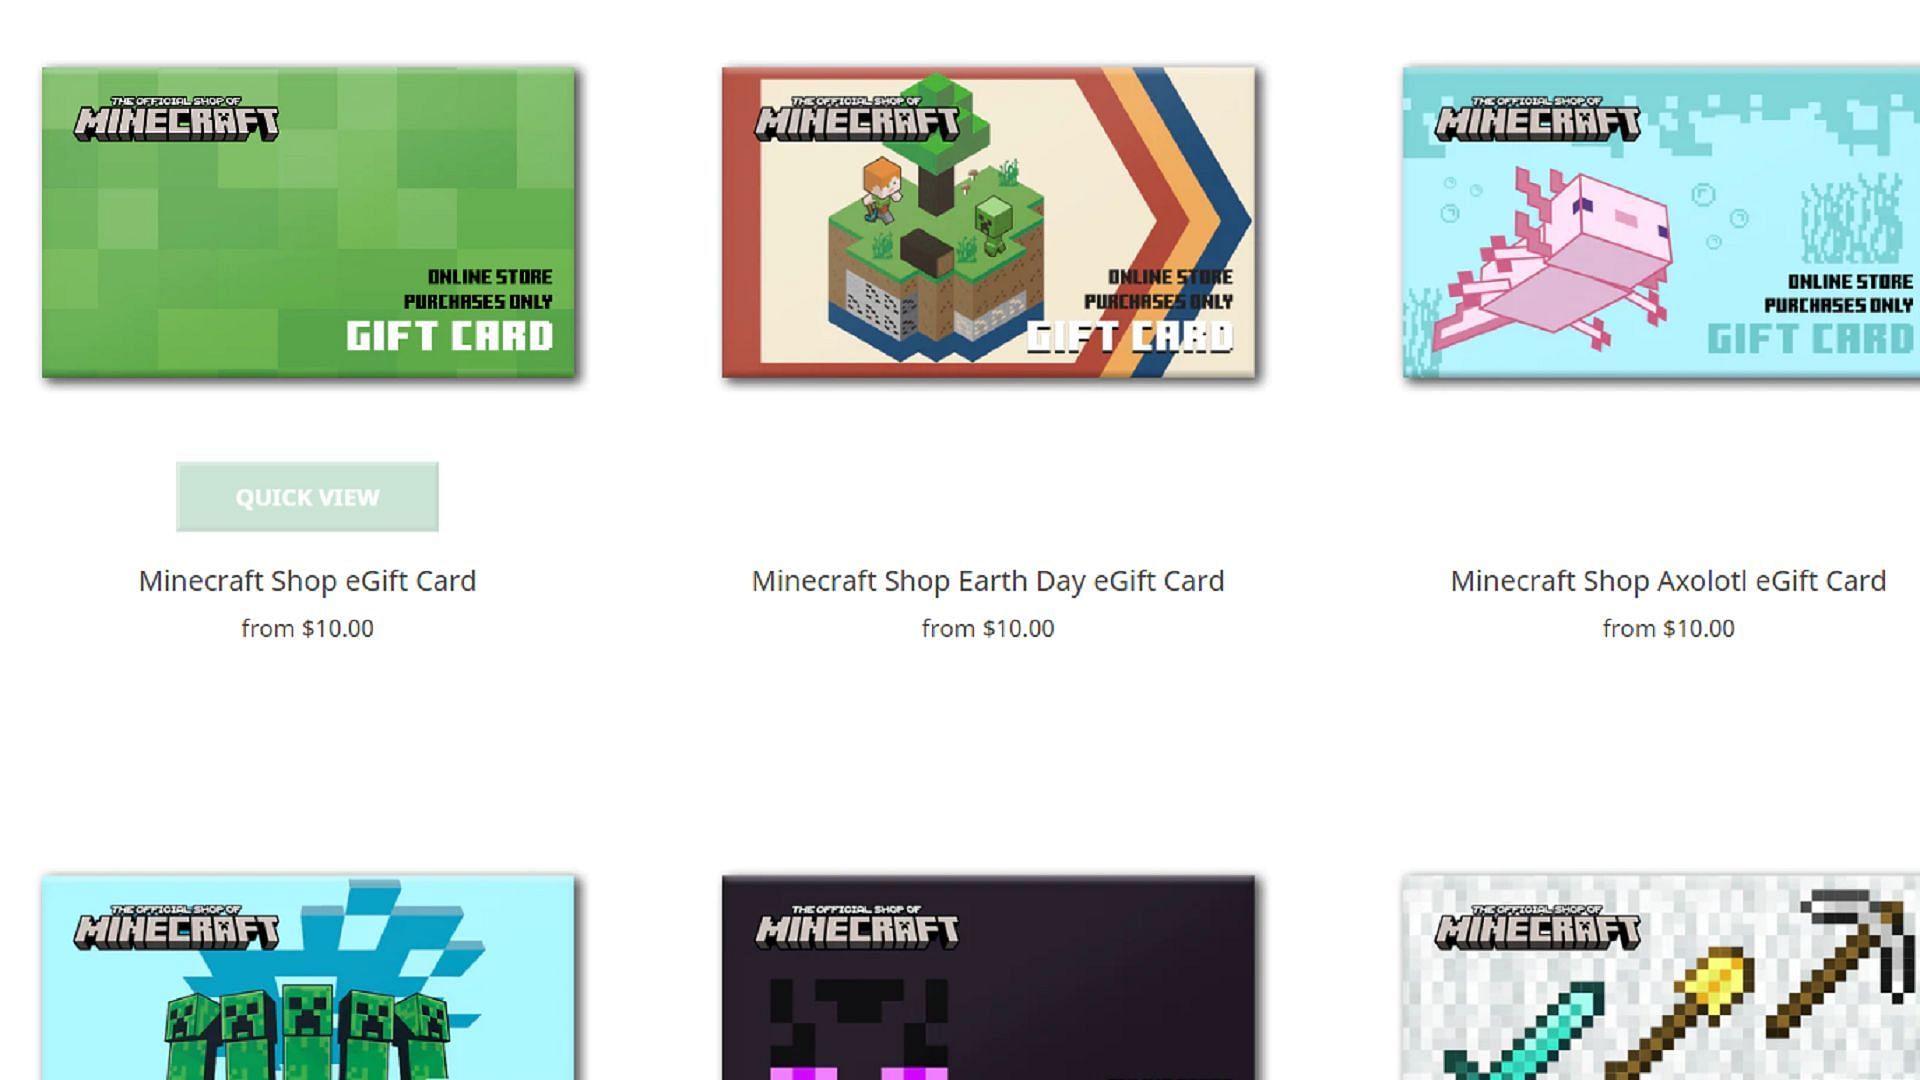 Mojang offers many different gift cards for Minecraft both physically and online (Image via Mojang)